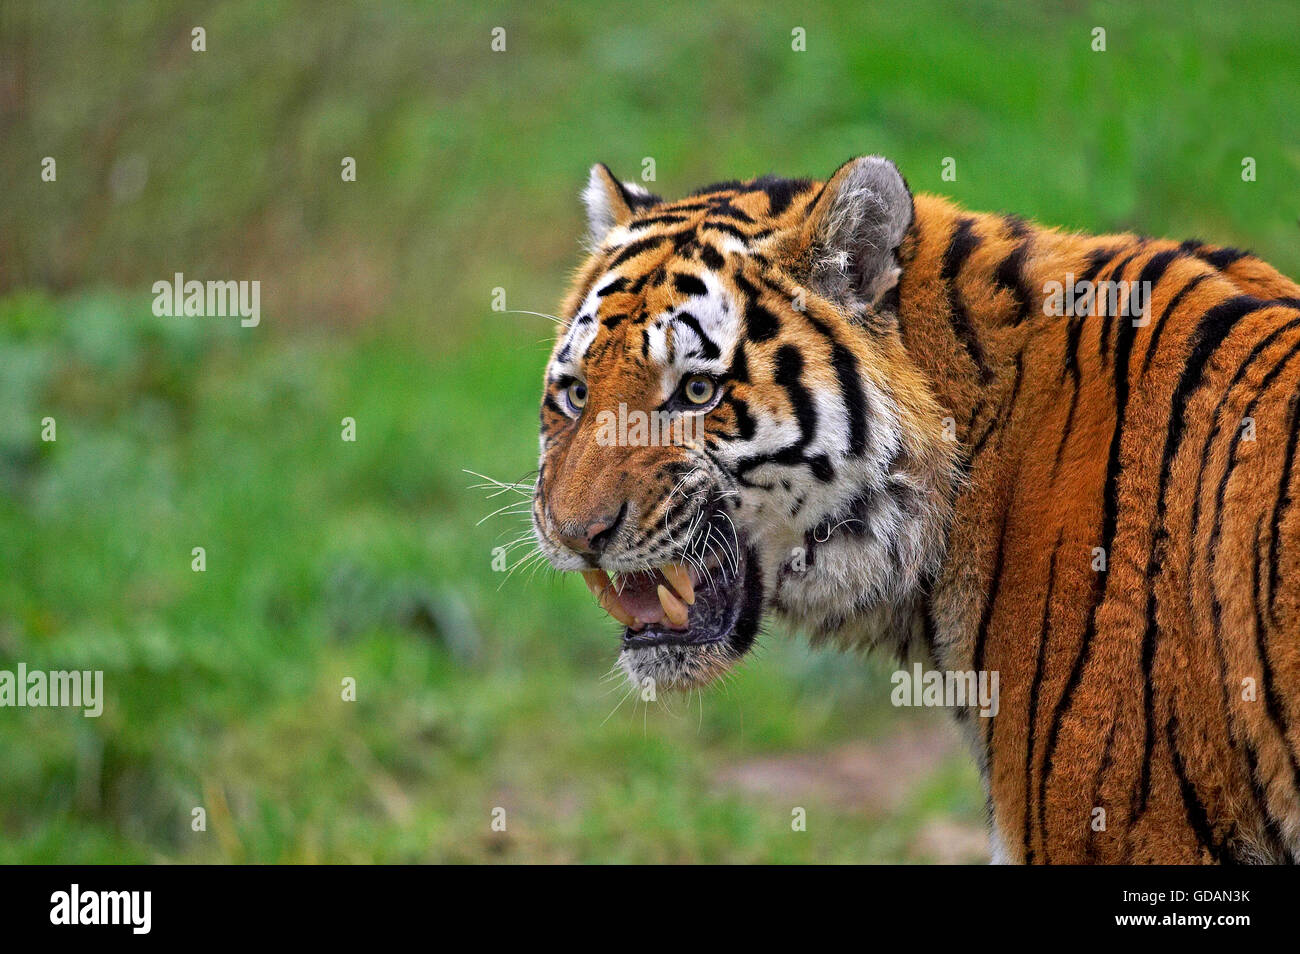 Siberian Tiger, panthera tigris altaica, Portait with open Mouth, Defense Posture Stock Photo